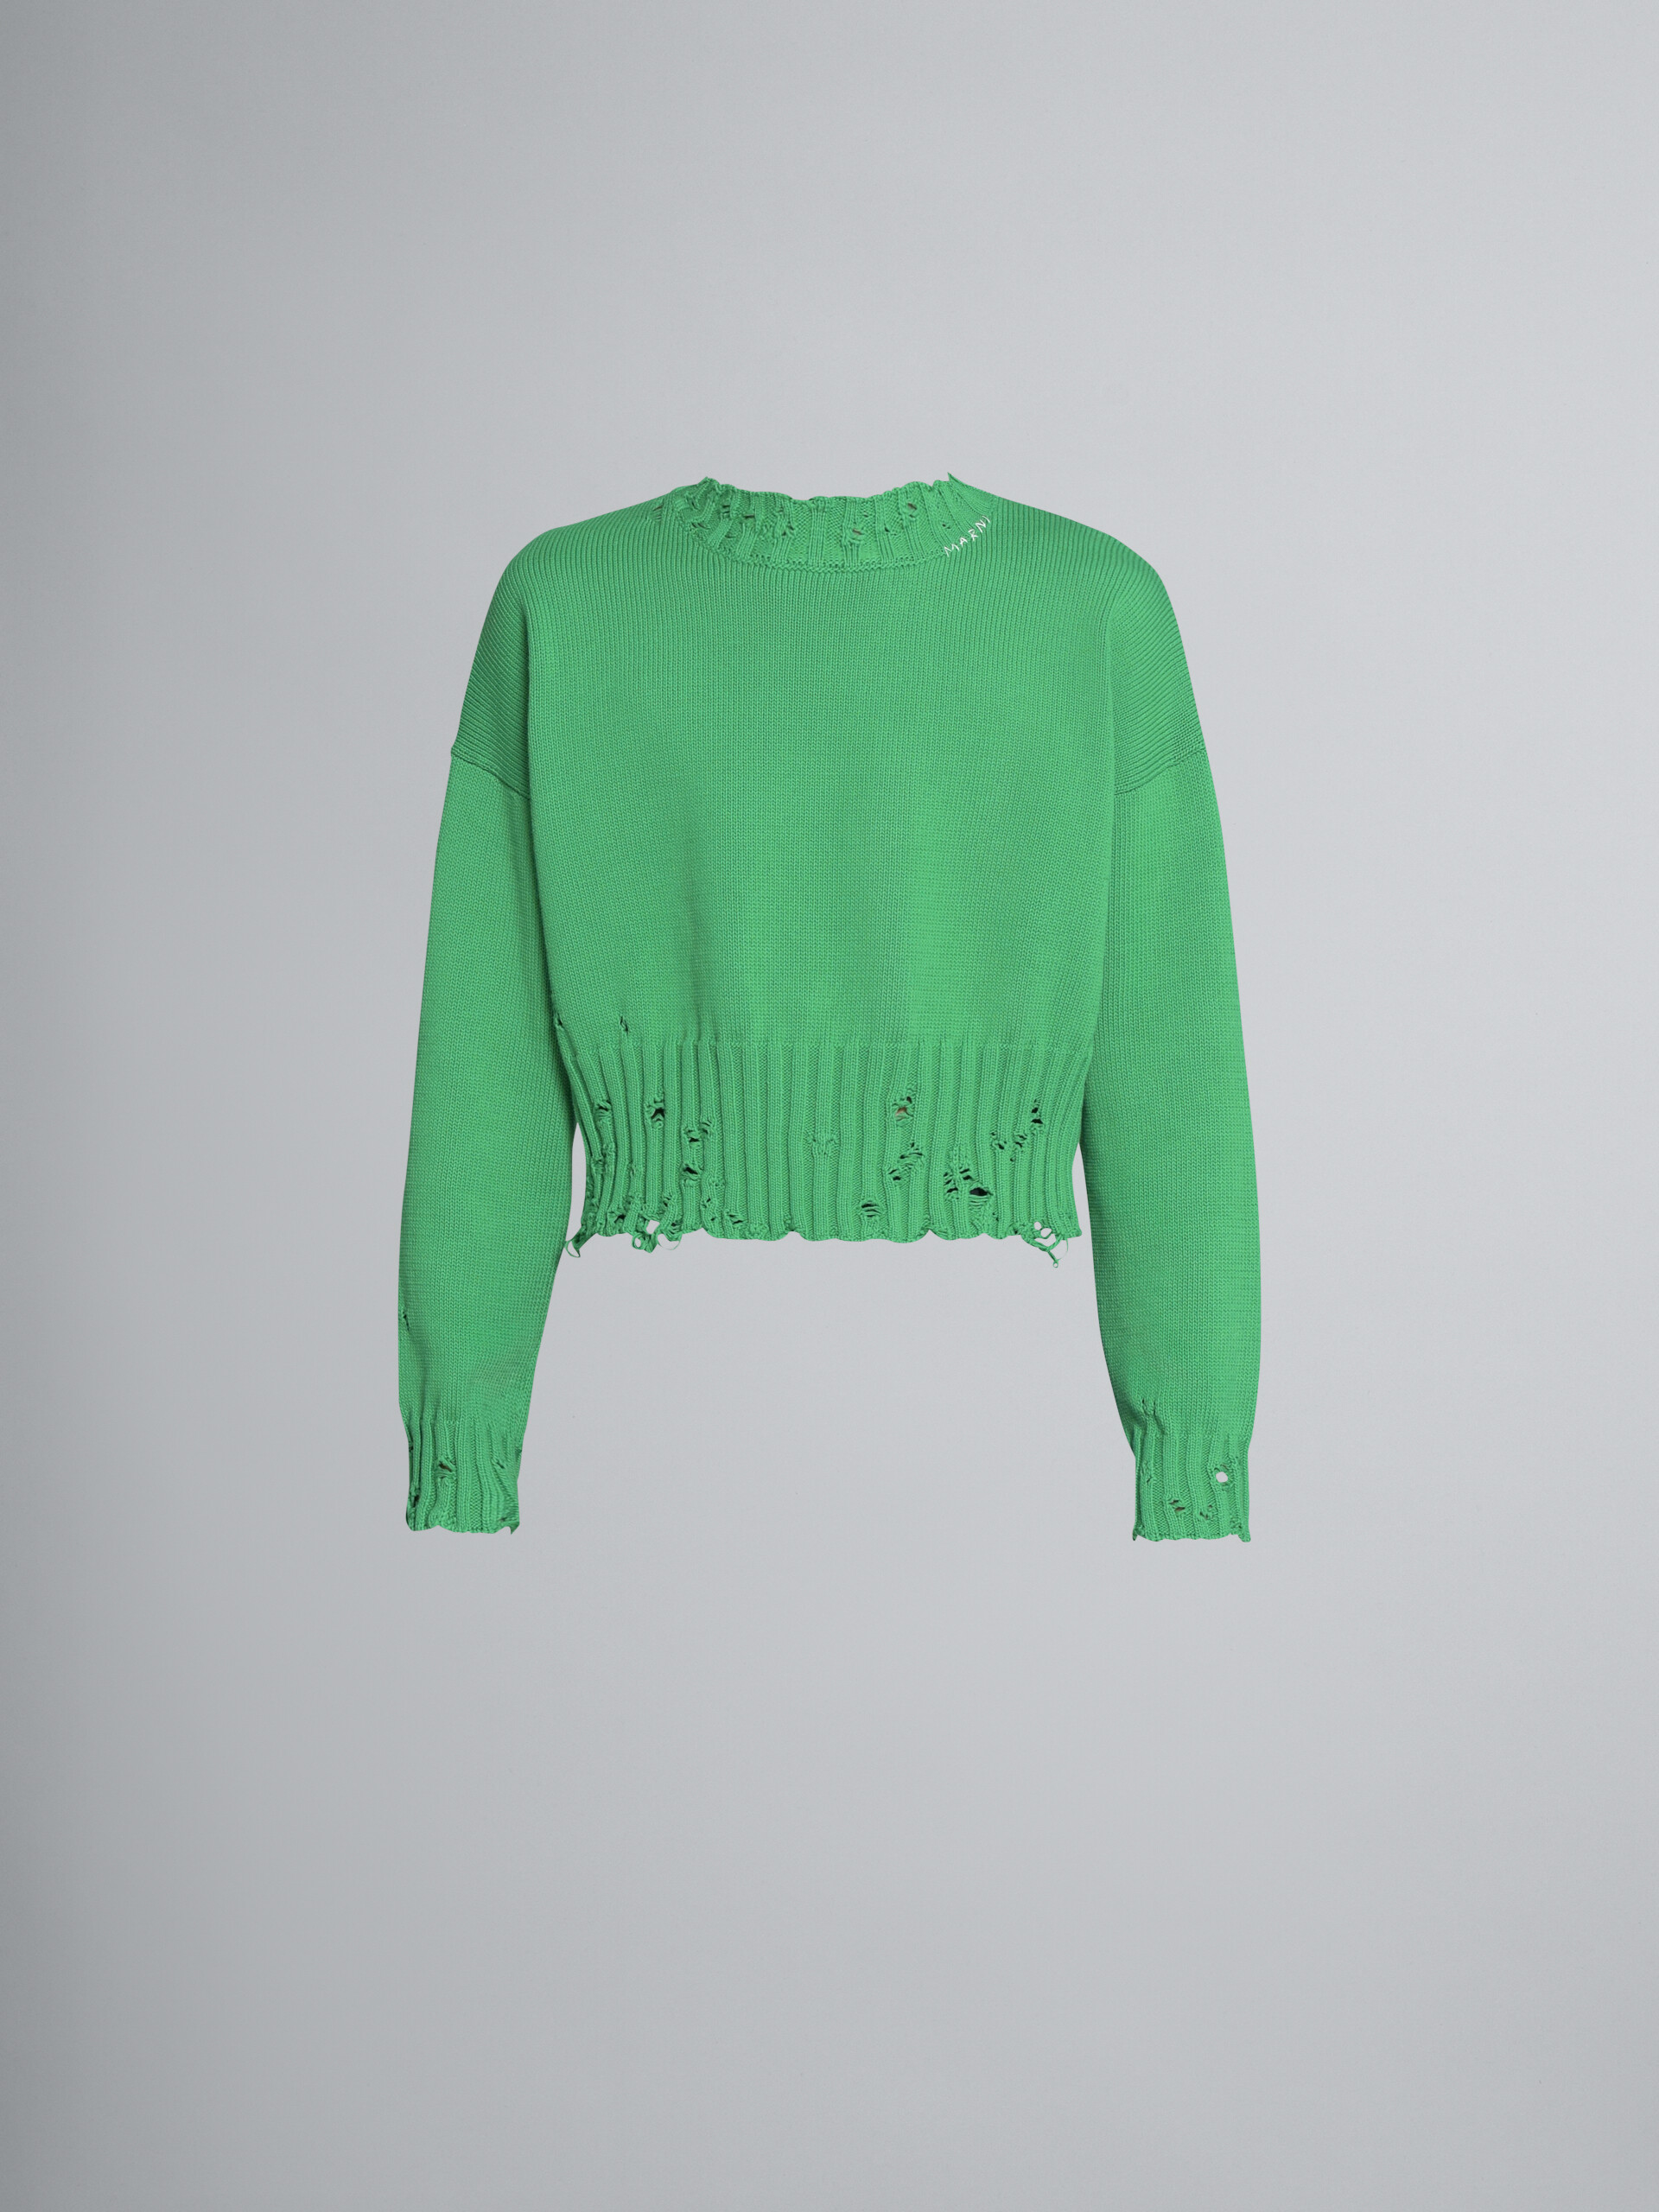 Green cotton crewneck sweater - Pullovers - Image 1